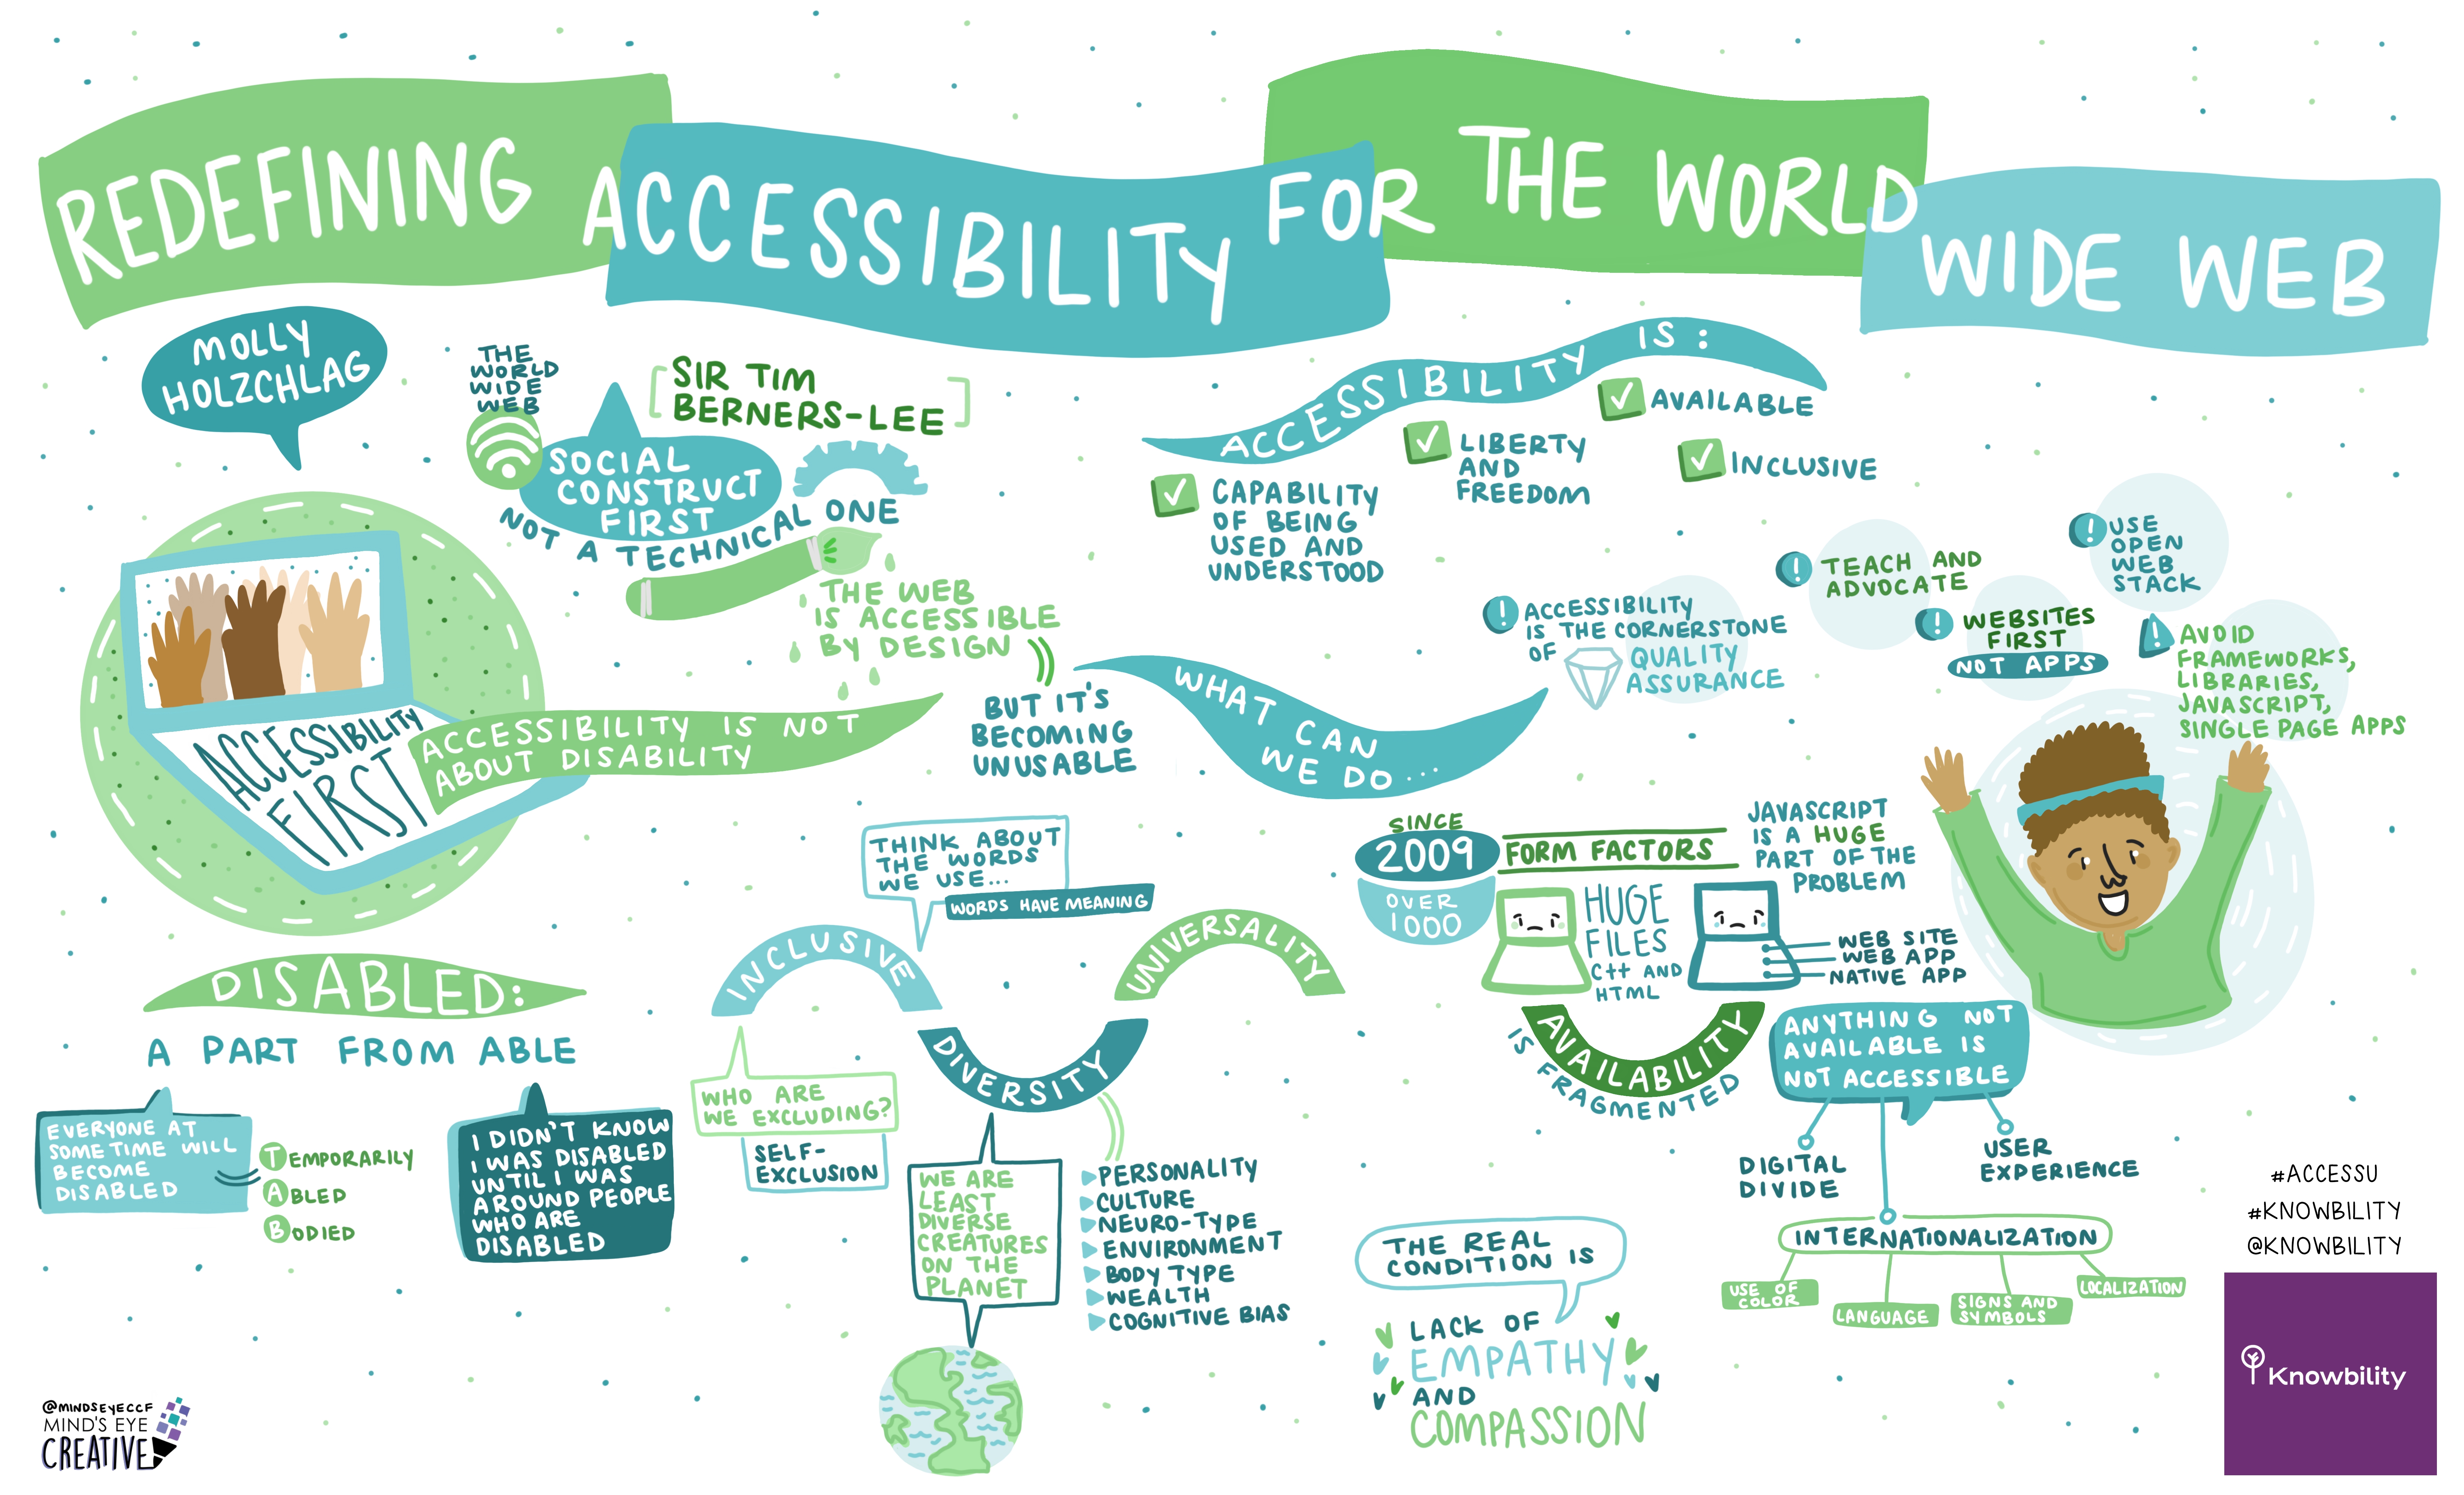 Sketchnote of the presentation titled, “Redefining Accessibility for the World Wide Web” by Molly Holzschlag at the AccessU event.